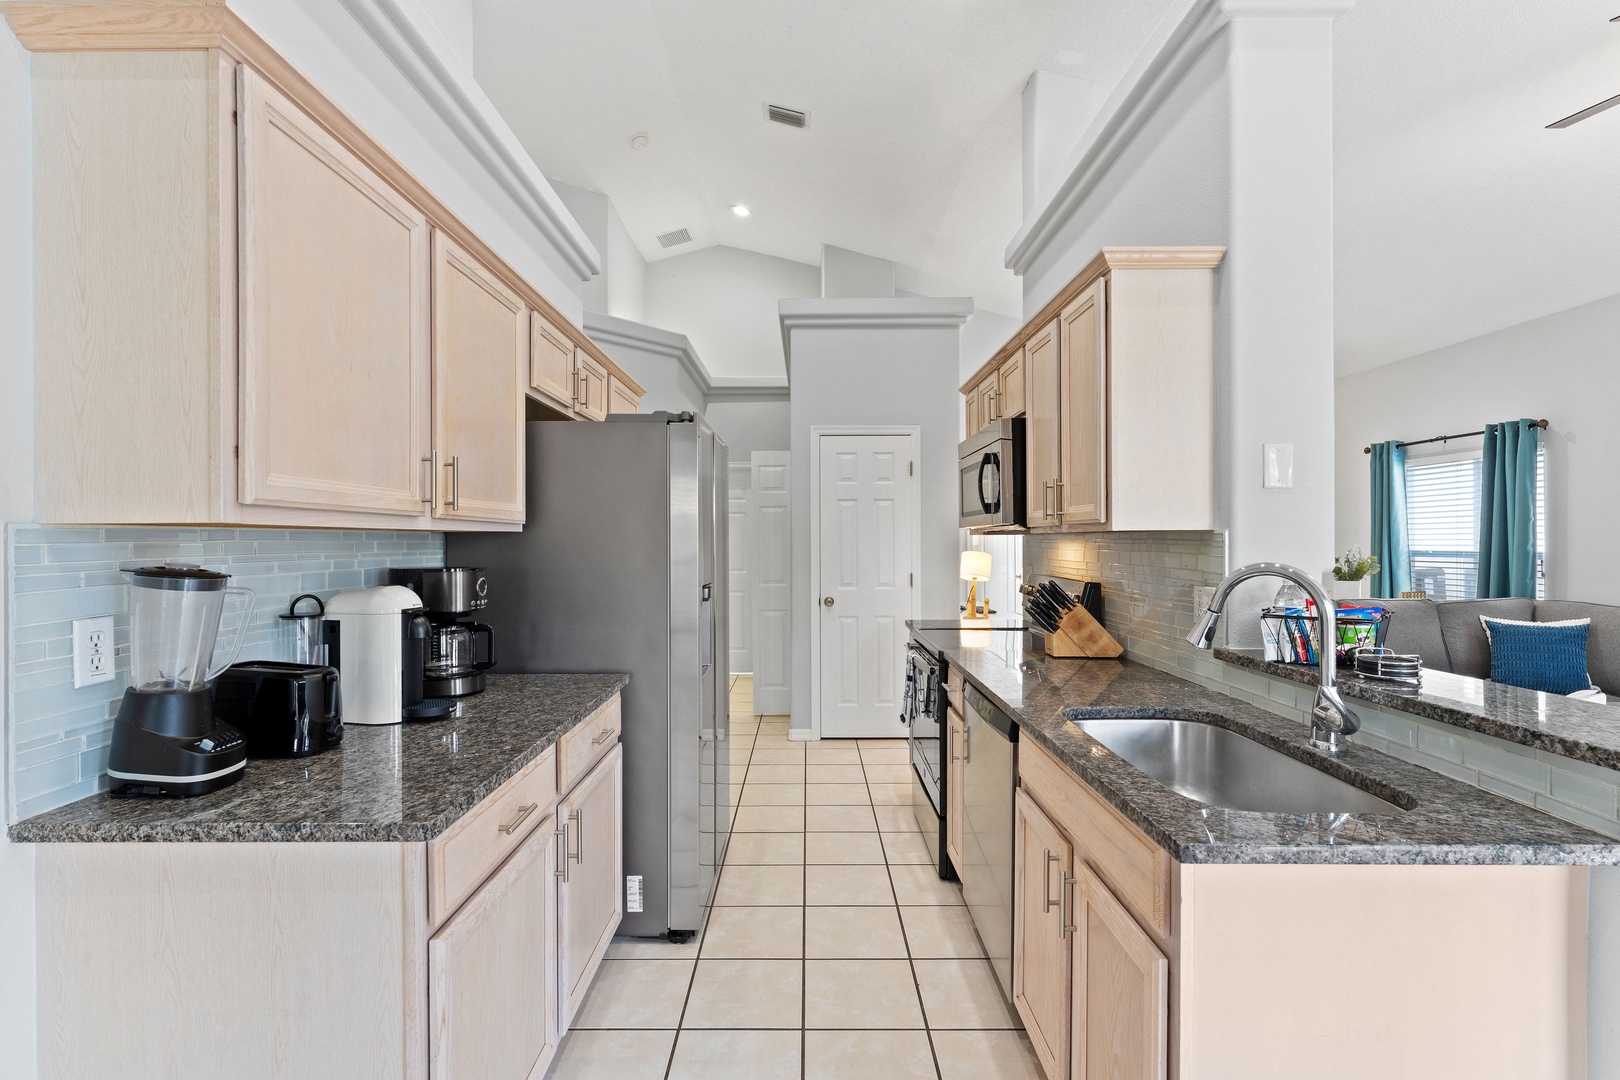 The airy kitchen offers ample space & all the comforts of home